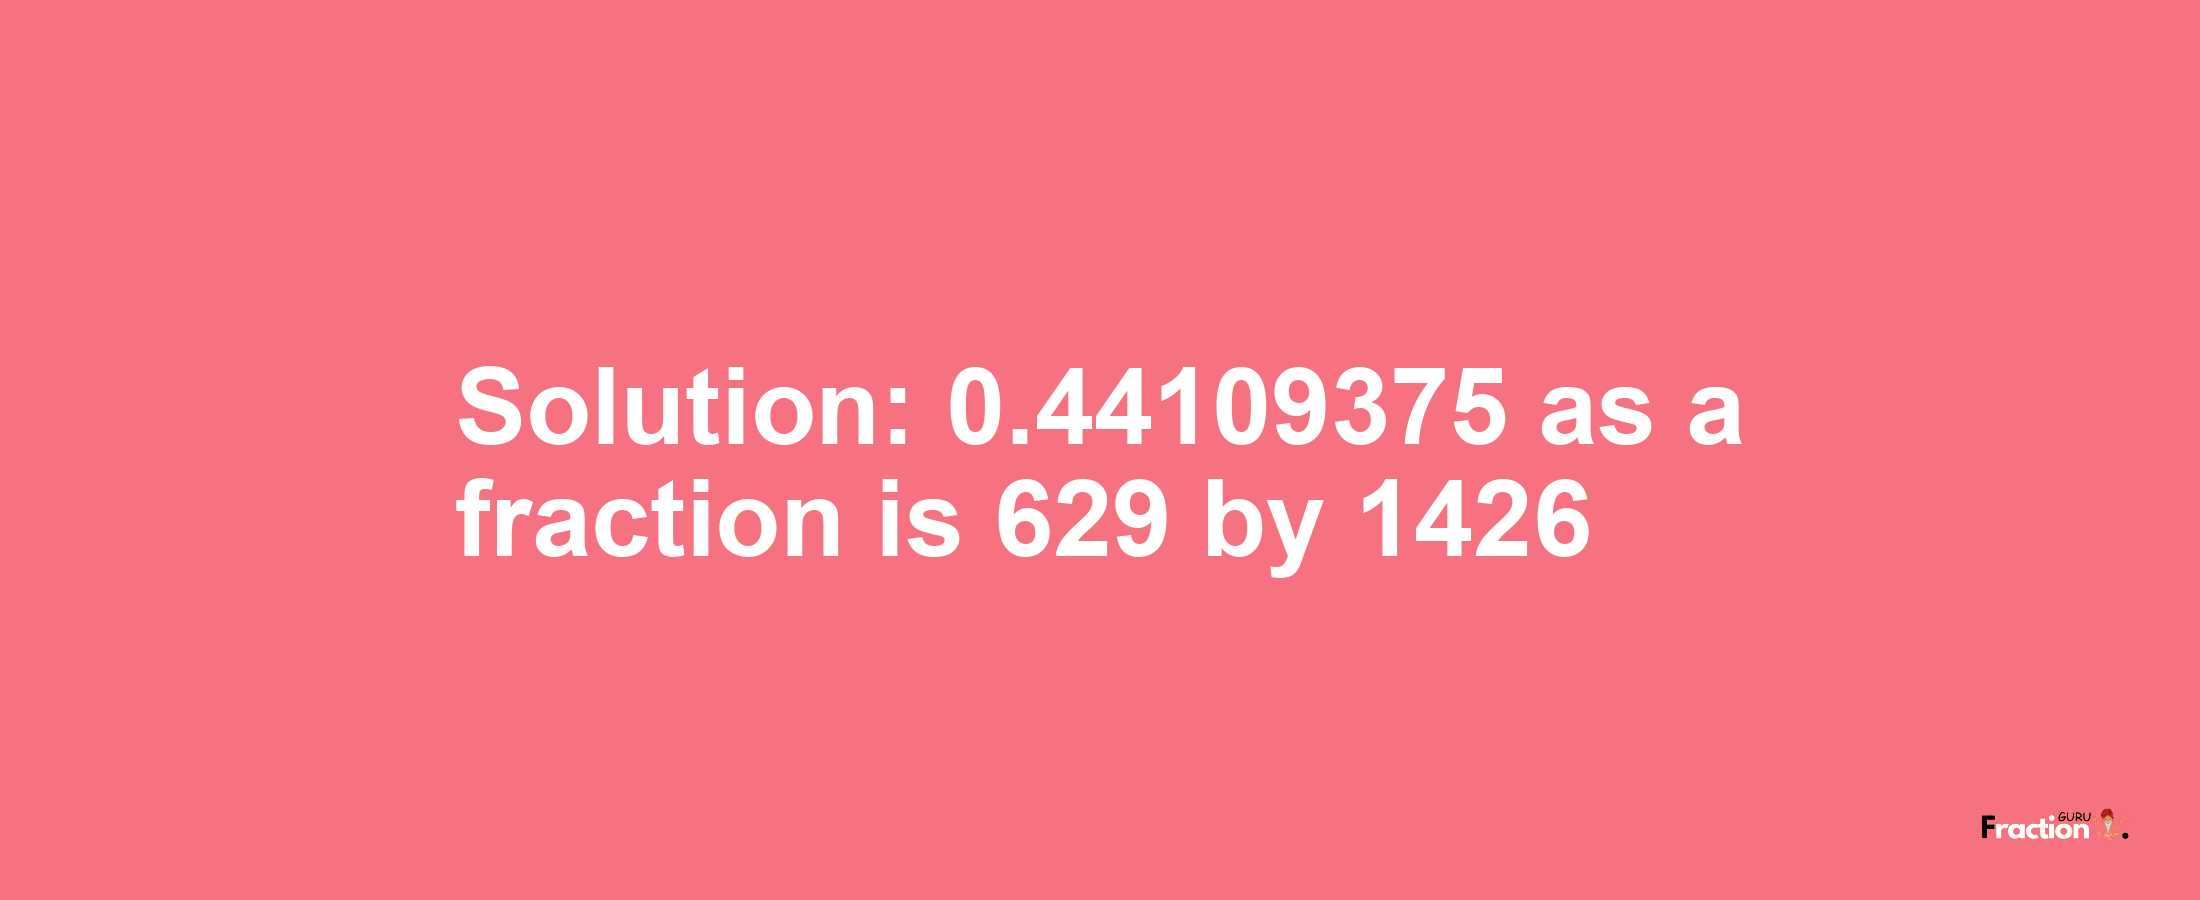 Solution:0.44109375 as a fraction is 629/1426